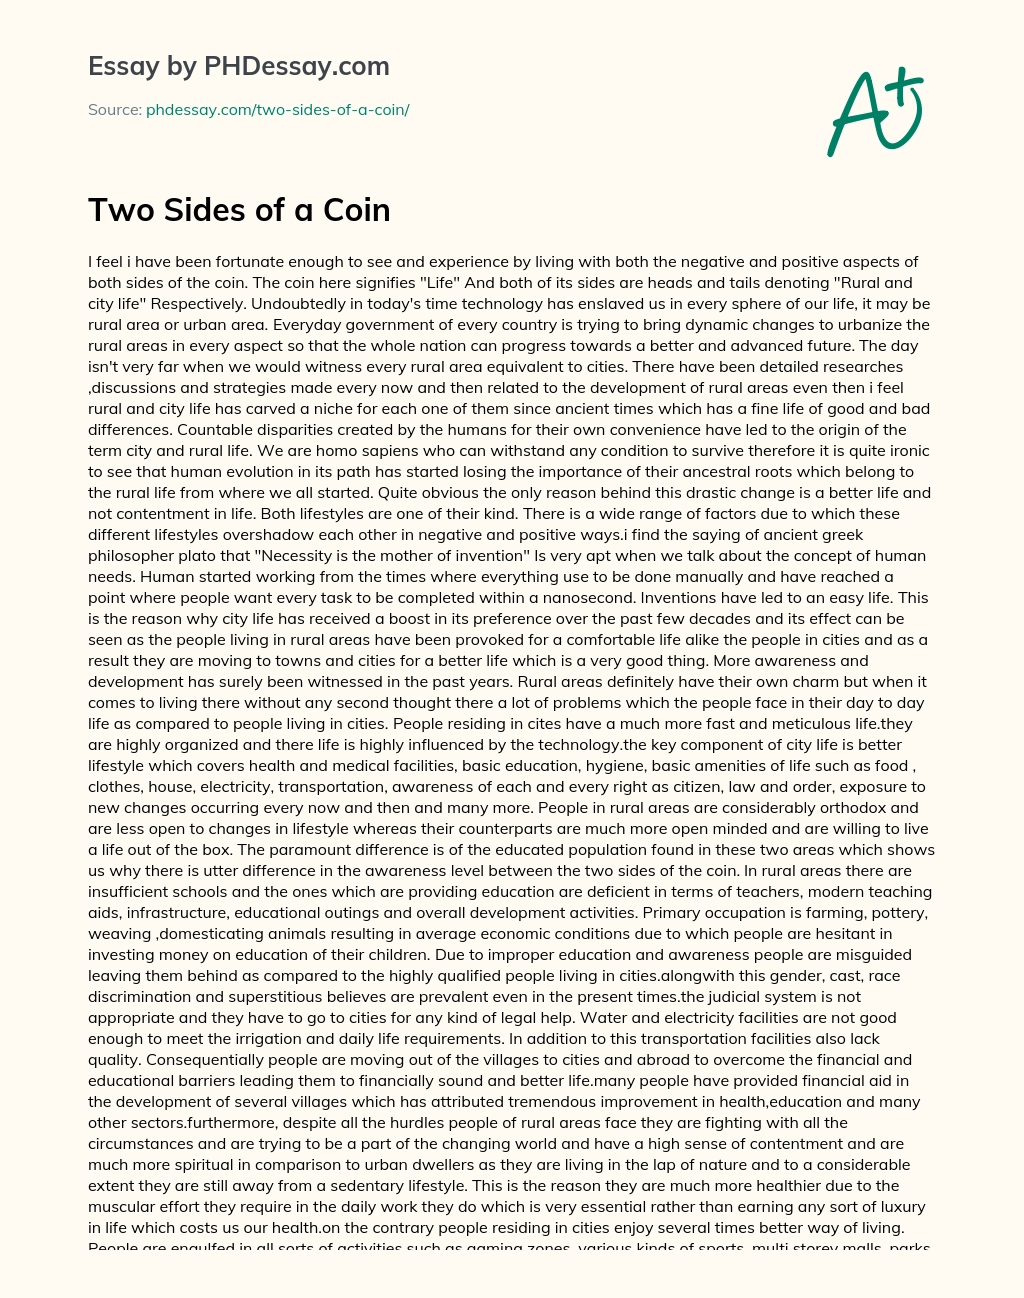 Two Sides of a Coin essay